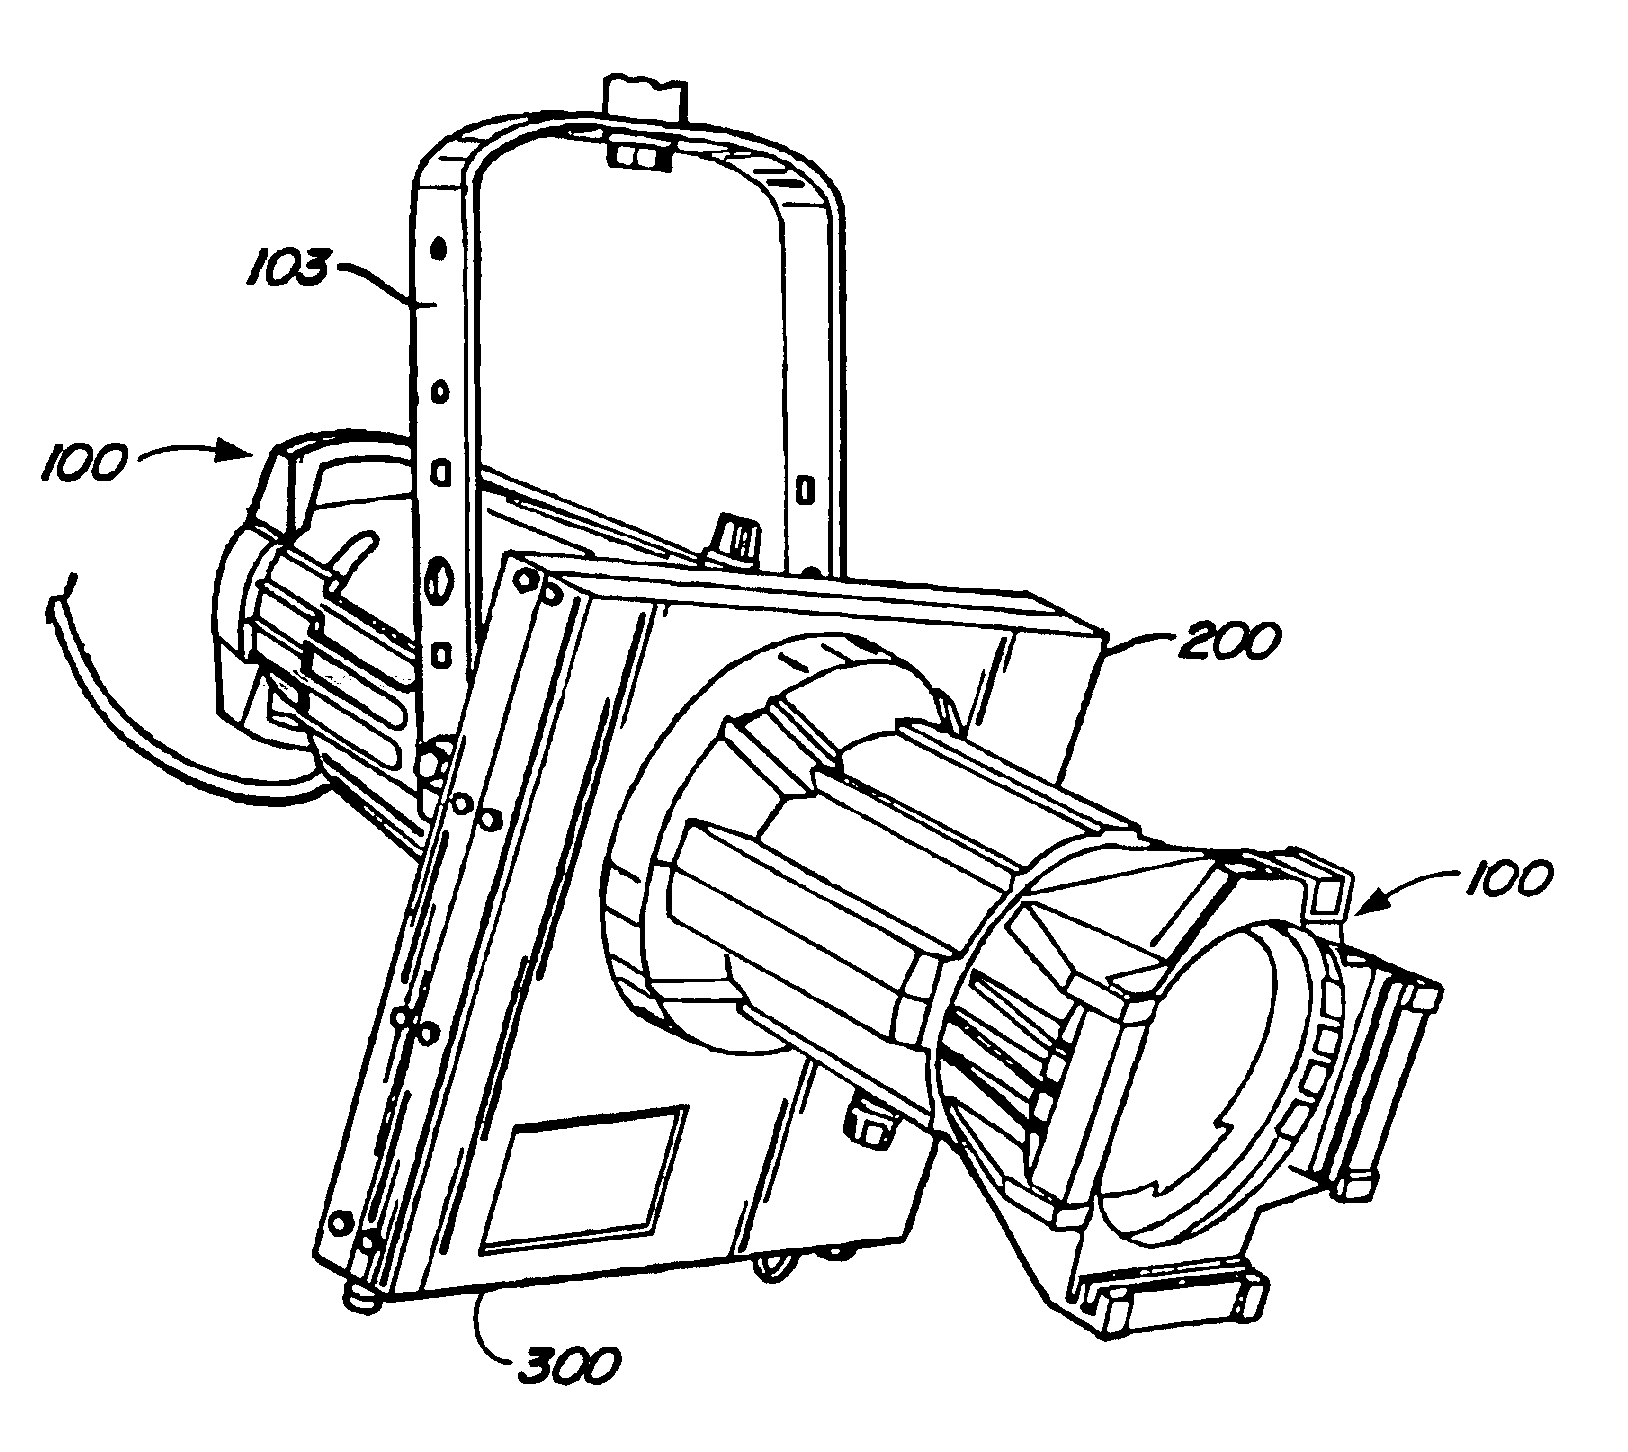 Projector attachment for ellipsoidal lamp